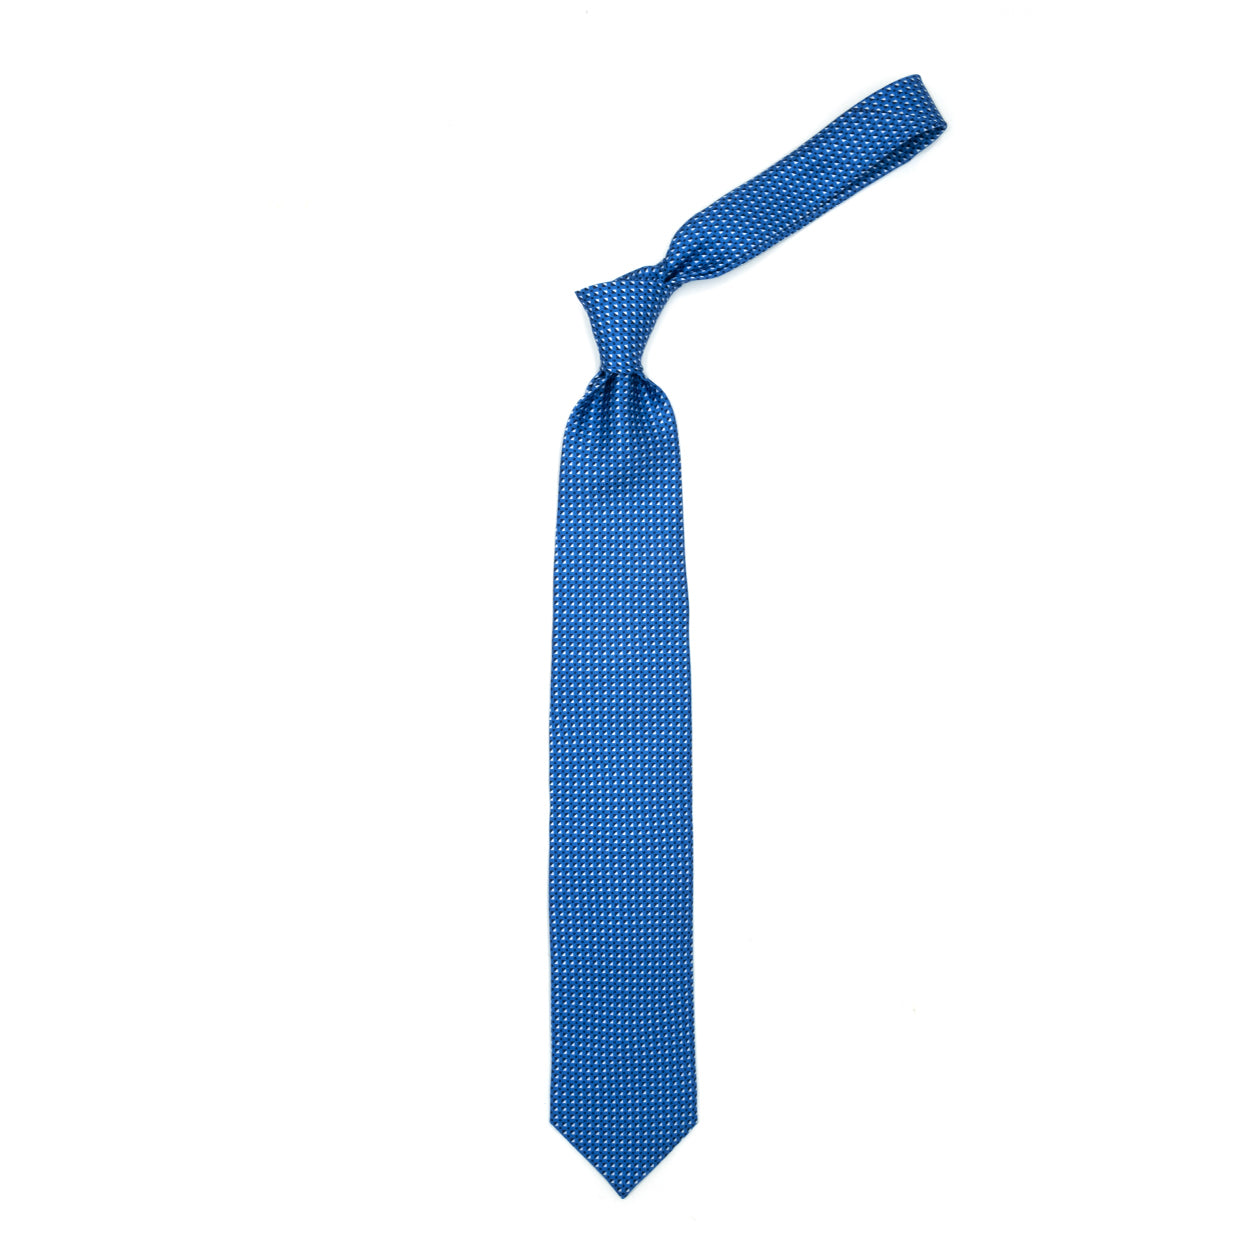 Blue tie with blue and white geometric pattern